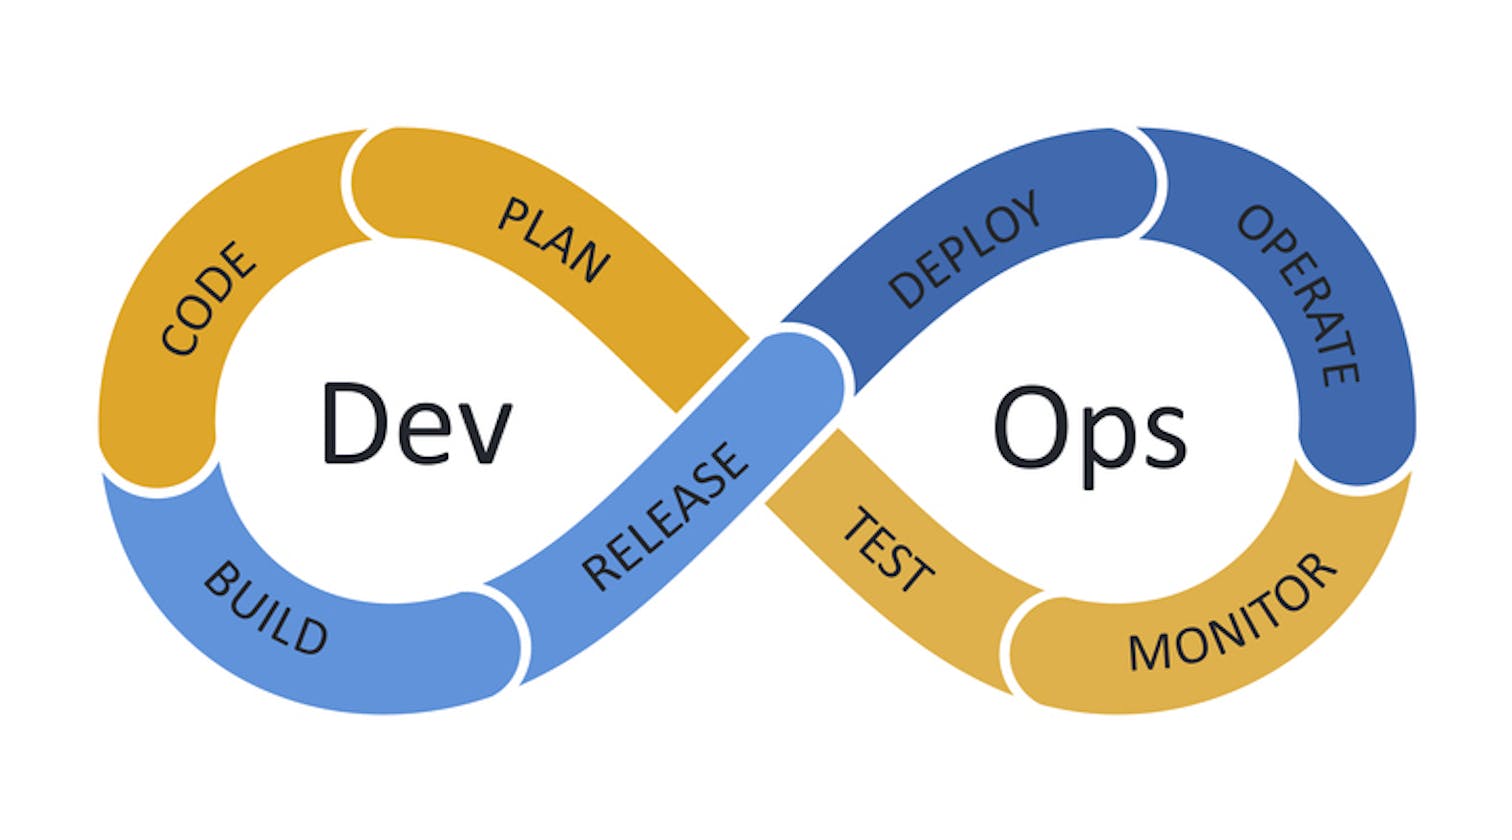 DevOps Project(v0.1): Automated creation of infrastructure and deployment of a webpage